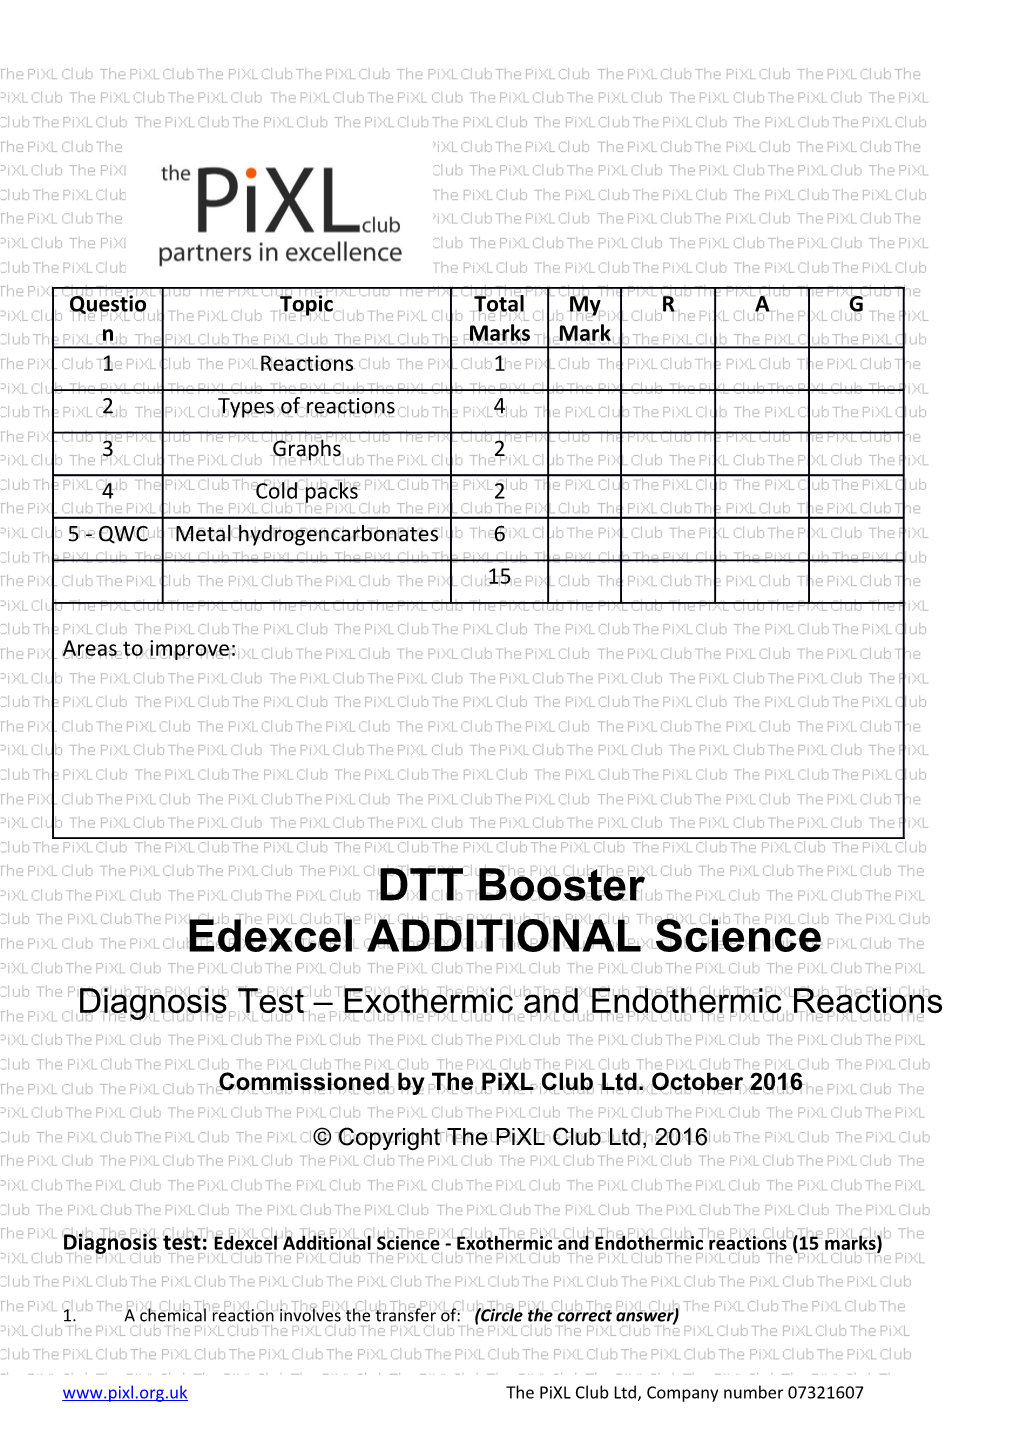 Diagnosis Test Exothermic and Endothermic Reactions